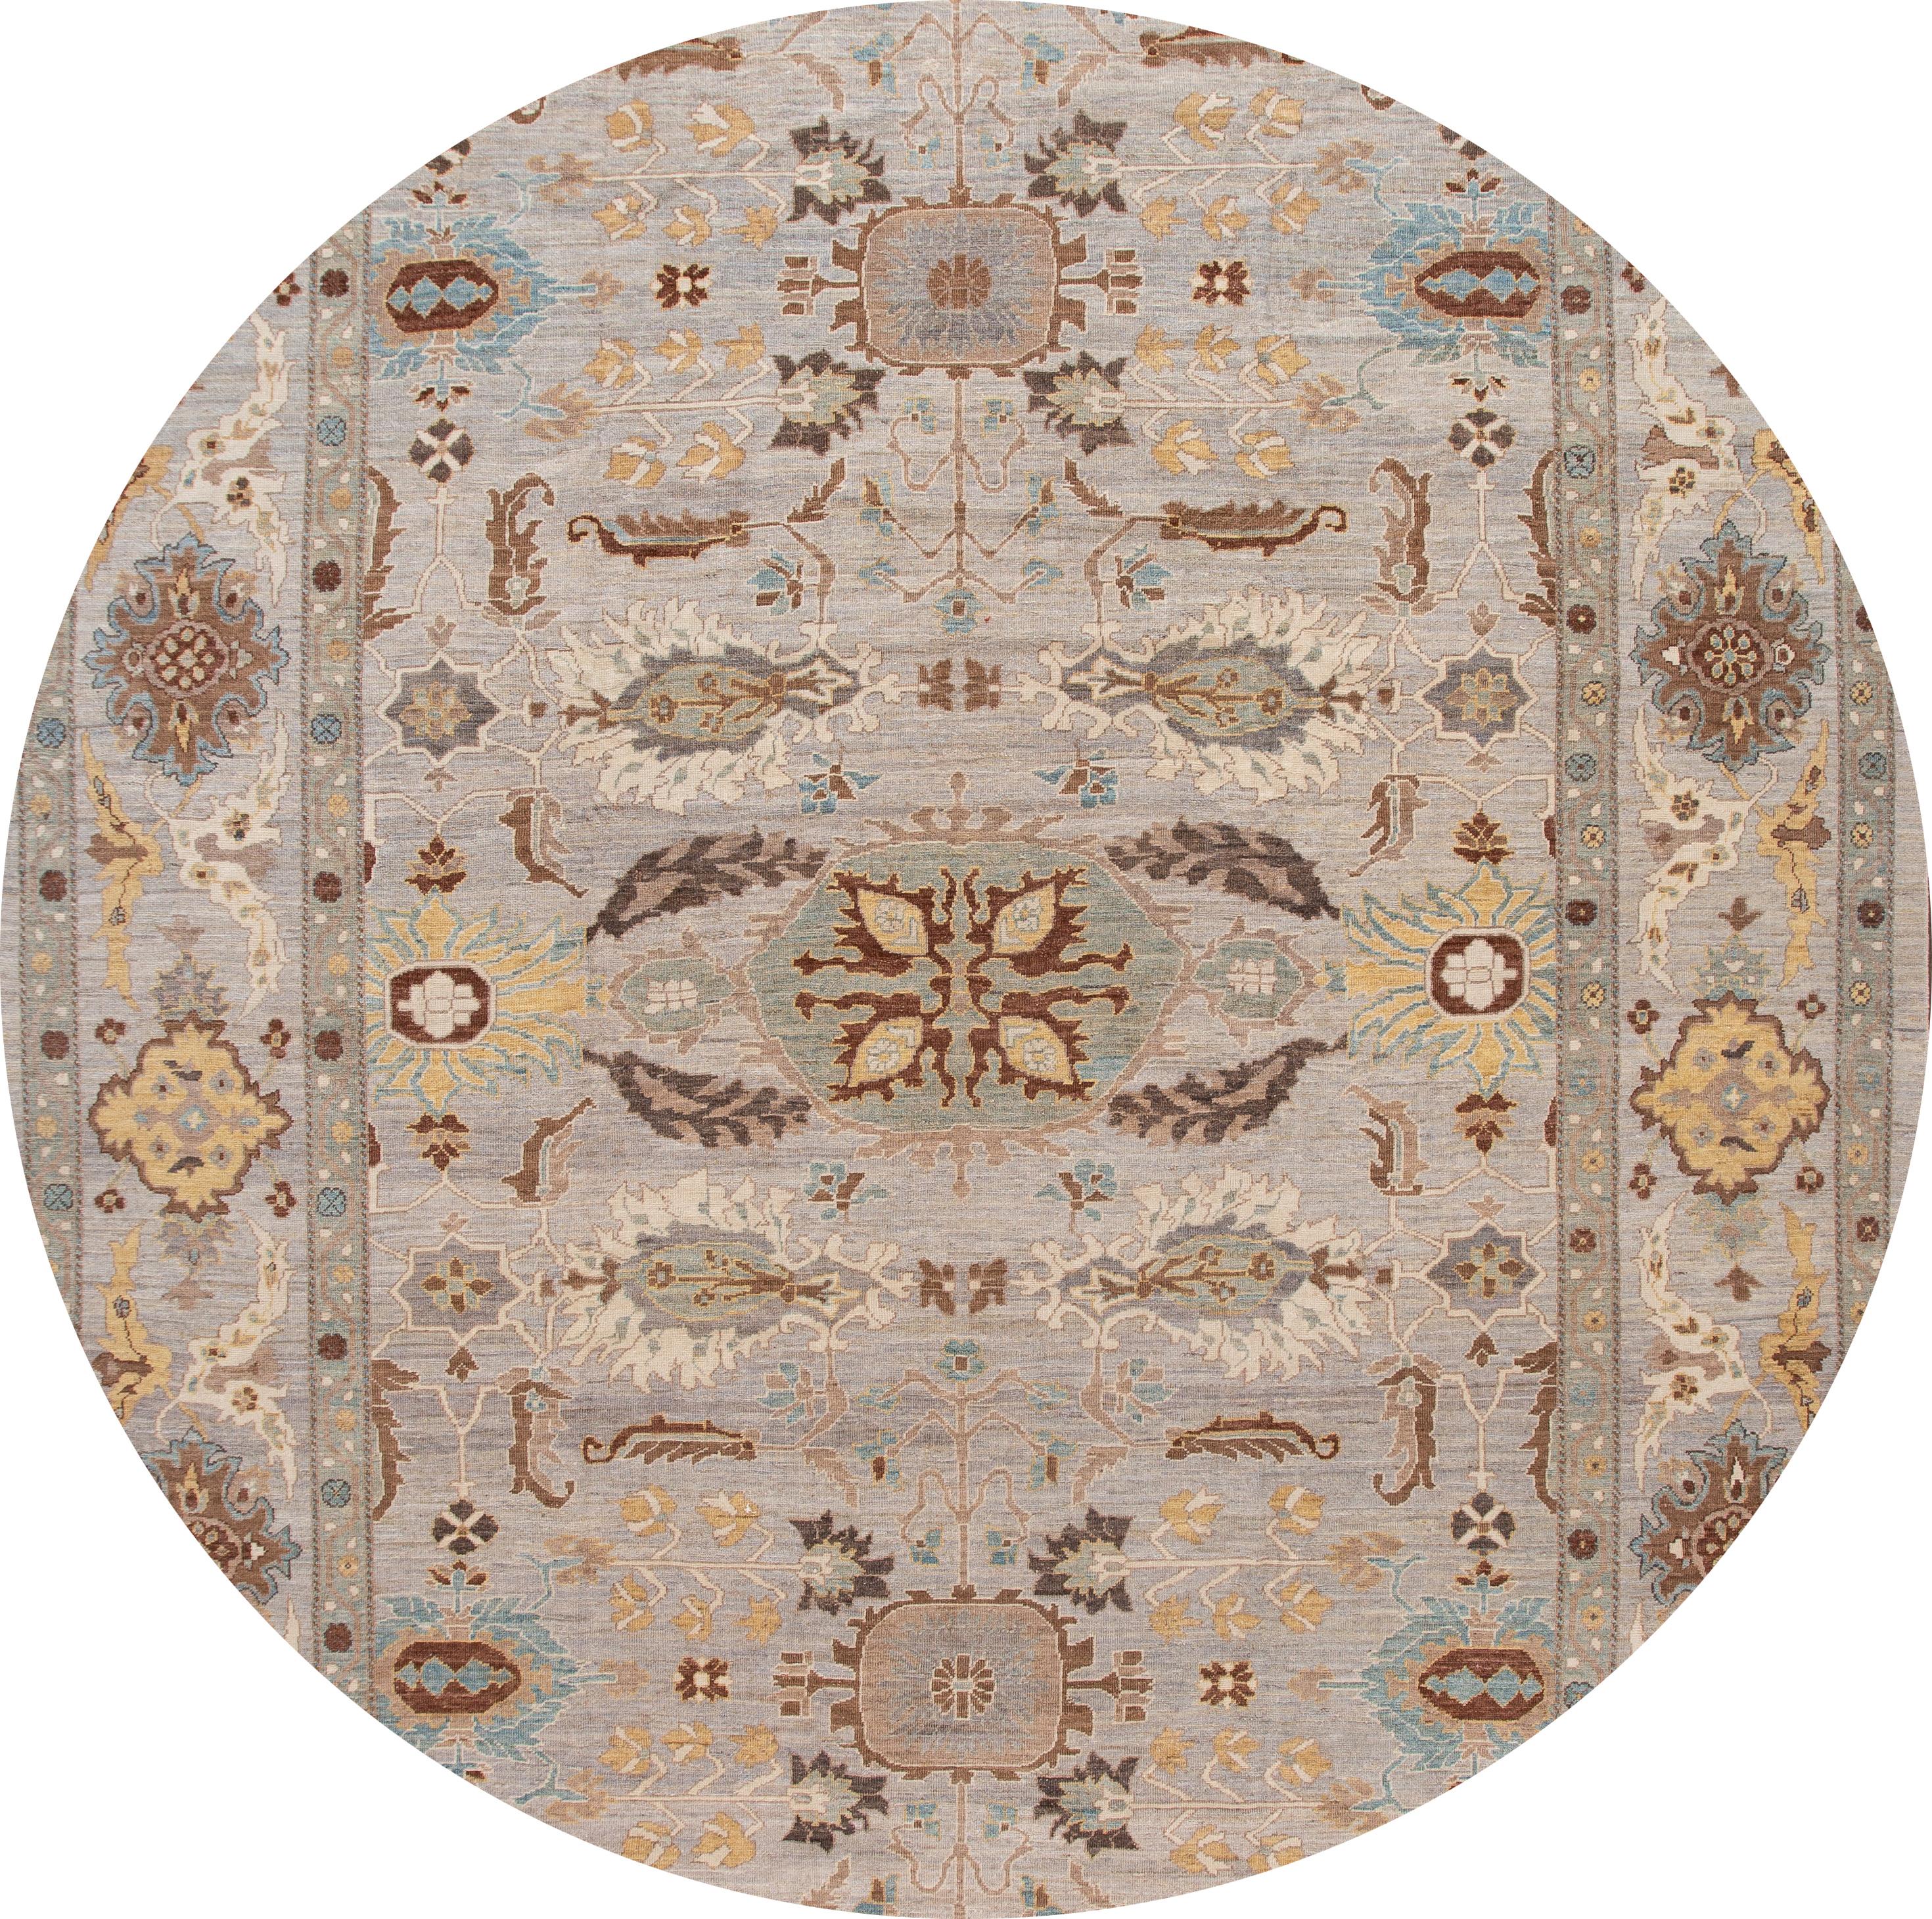 A beautiful hand knotted modern Sultanabad oversize wool rug with a gray field, and brown accents in an all-over floral design.

This rug measures: 12'10